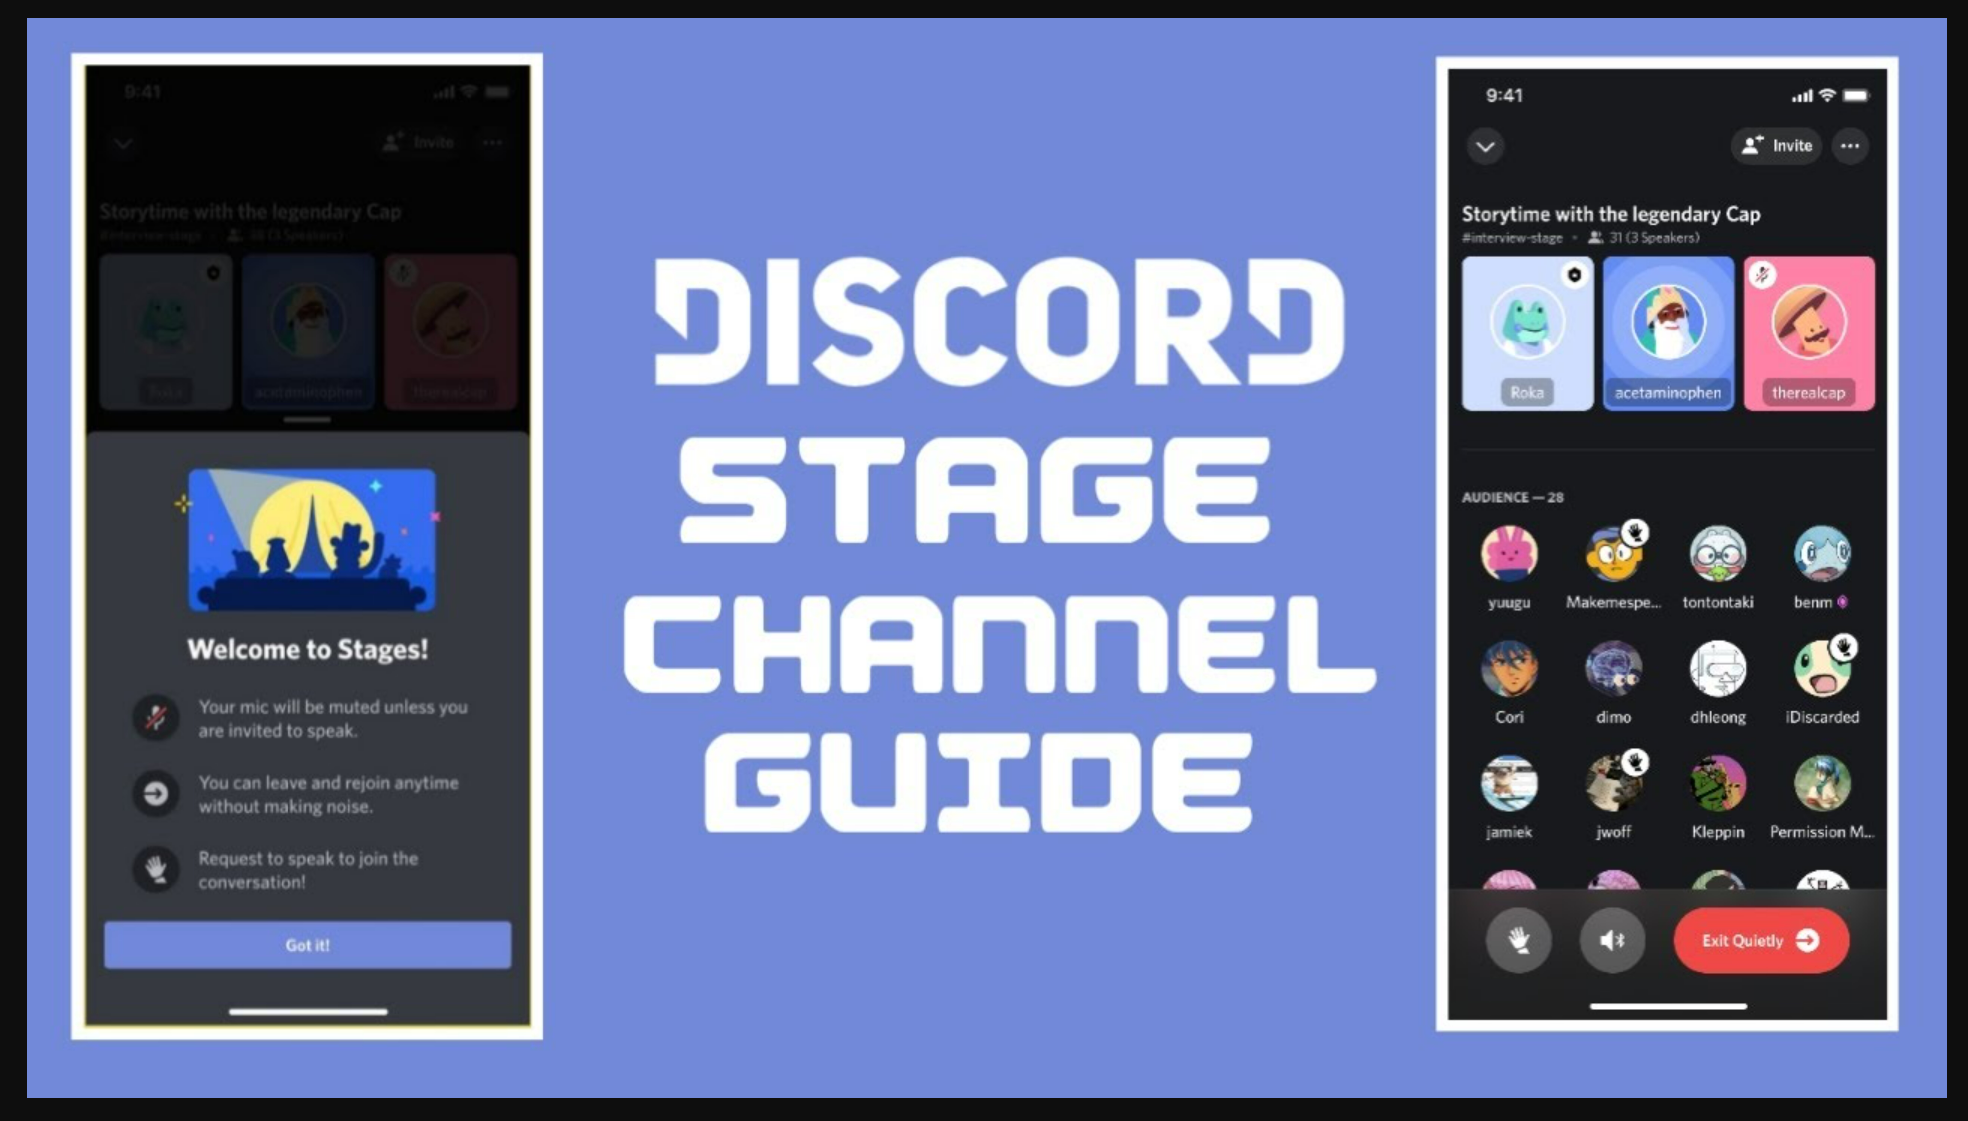 A guide for Diacord Channel